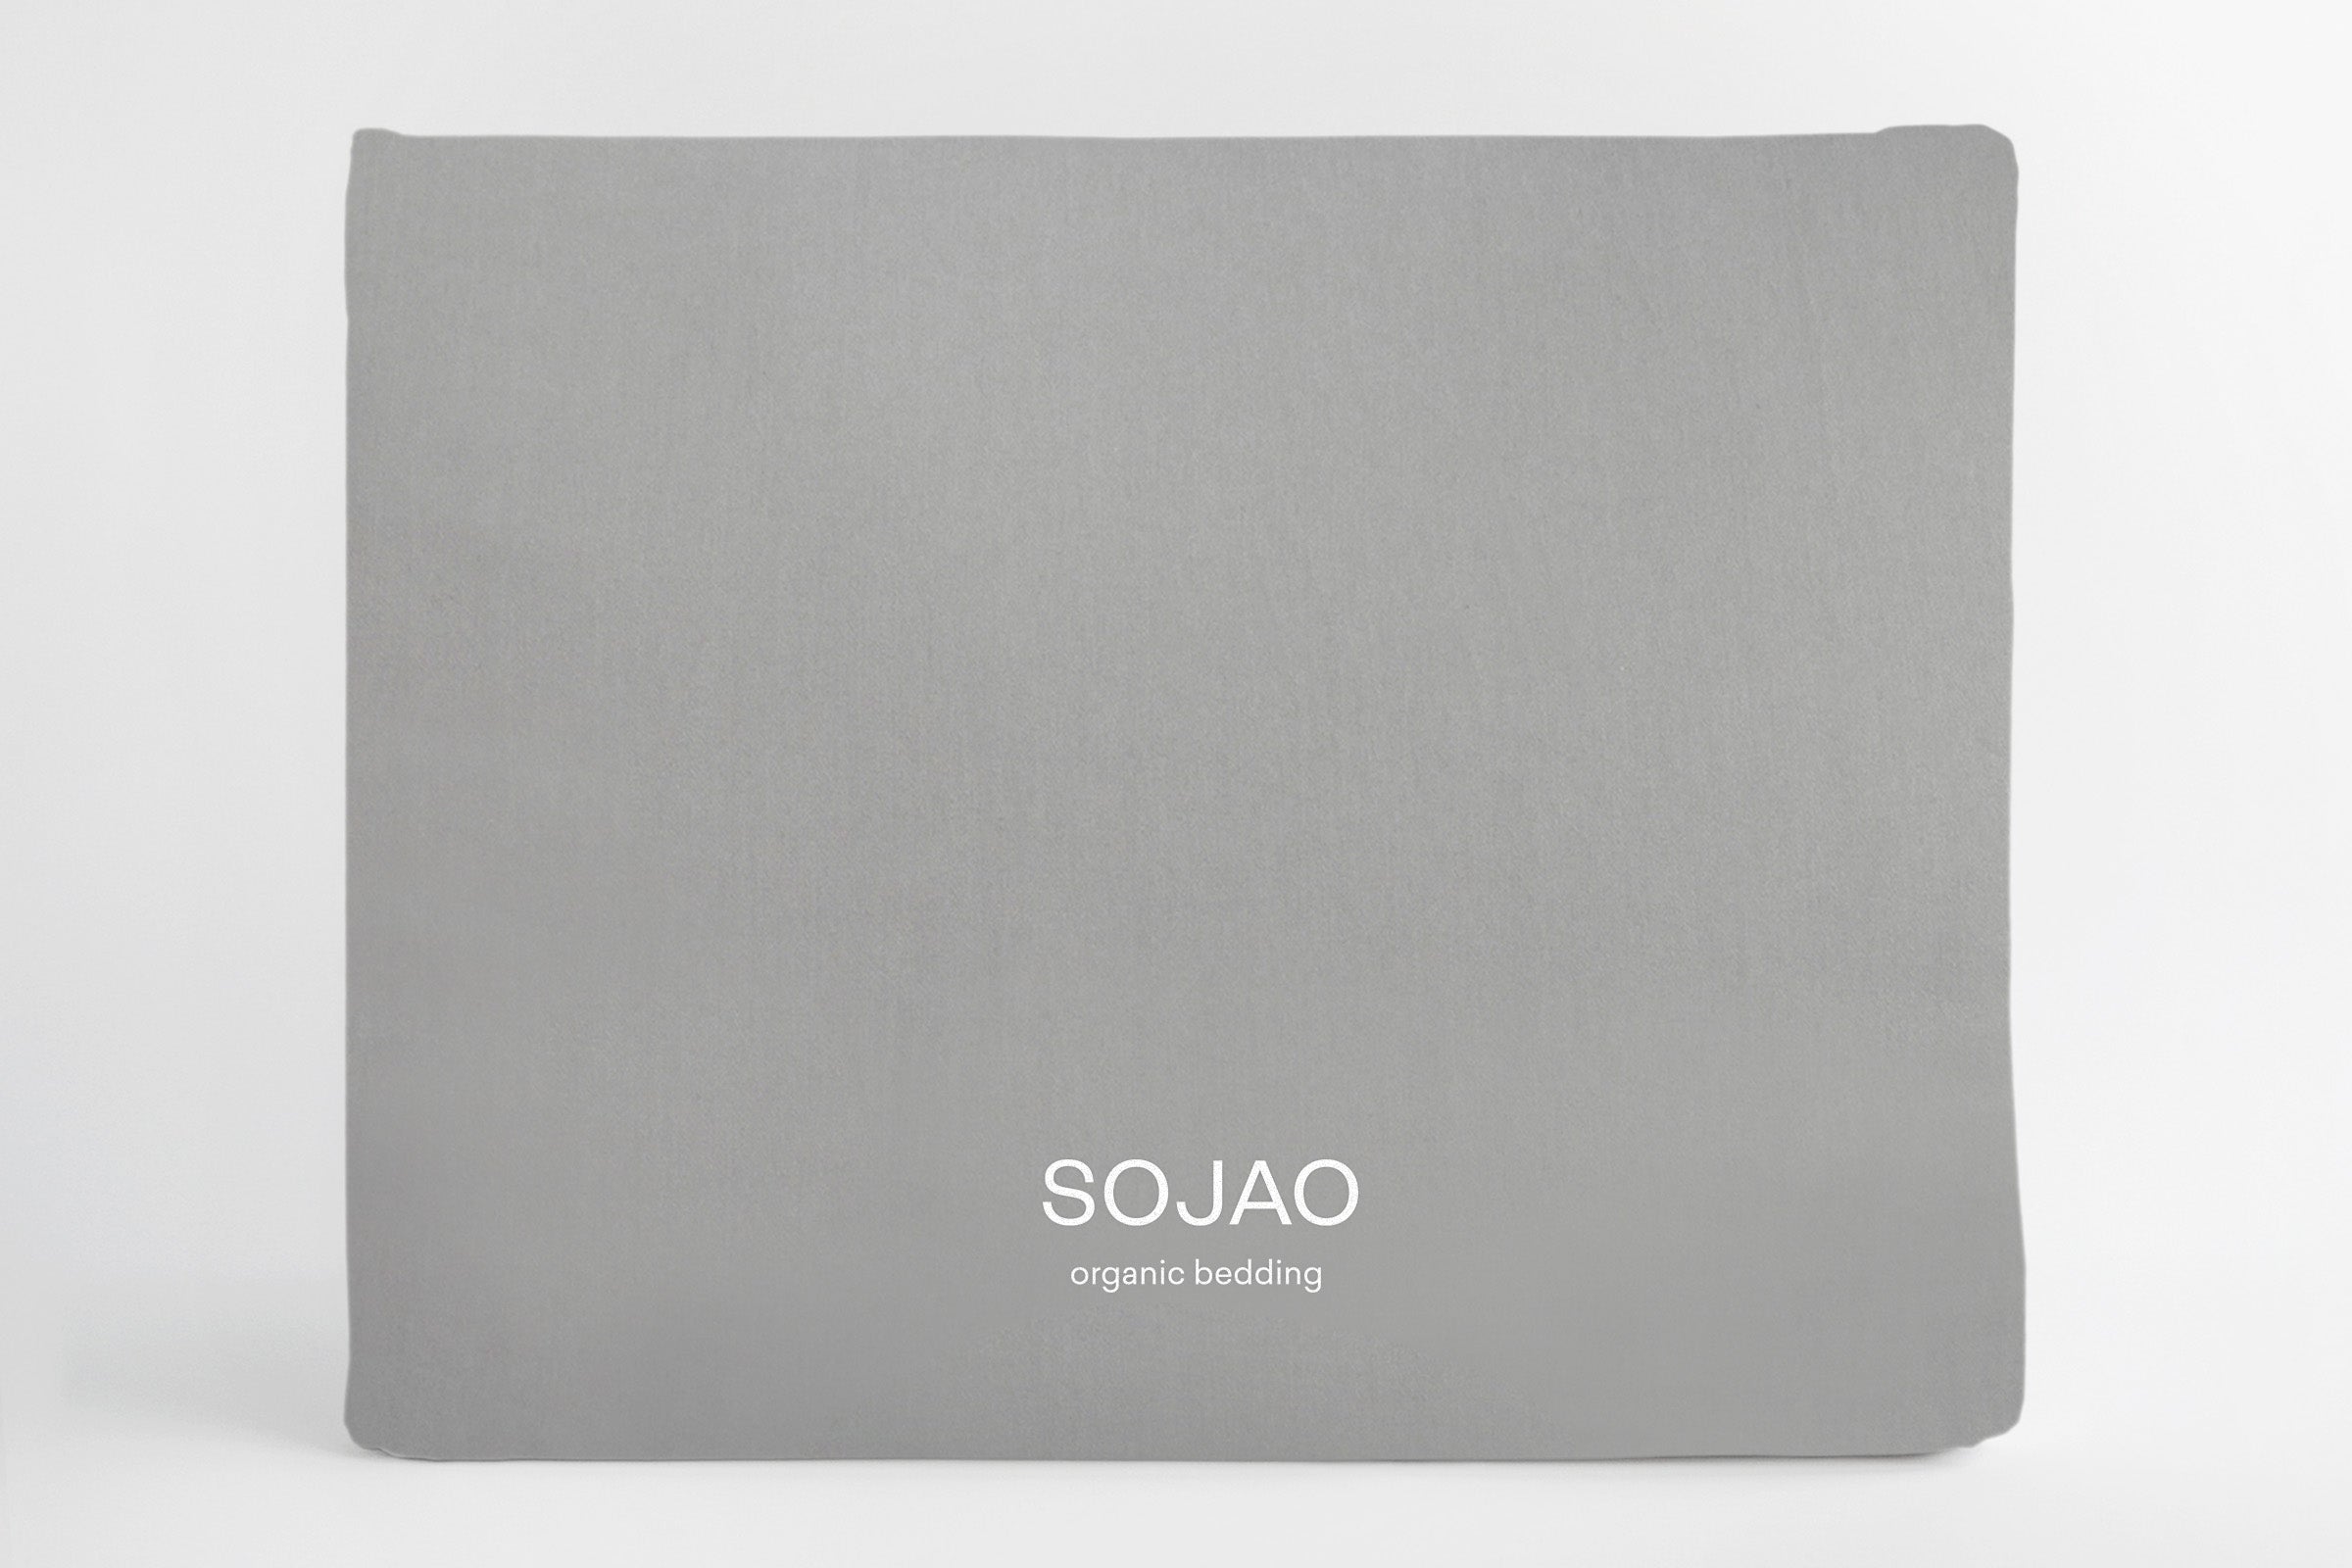 classic-cloud-body-pillow-case-dust-bag-by-sojao.jpg